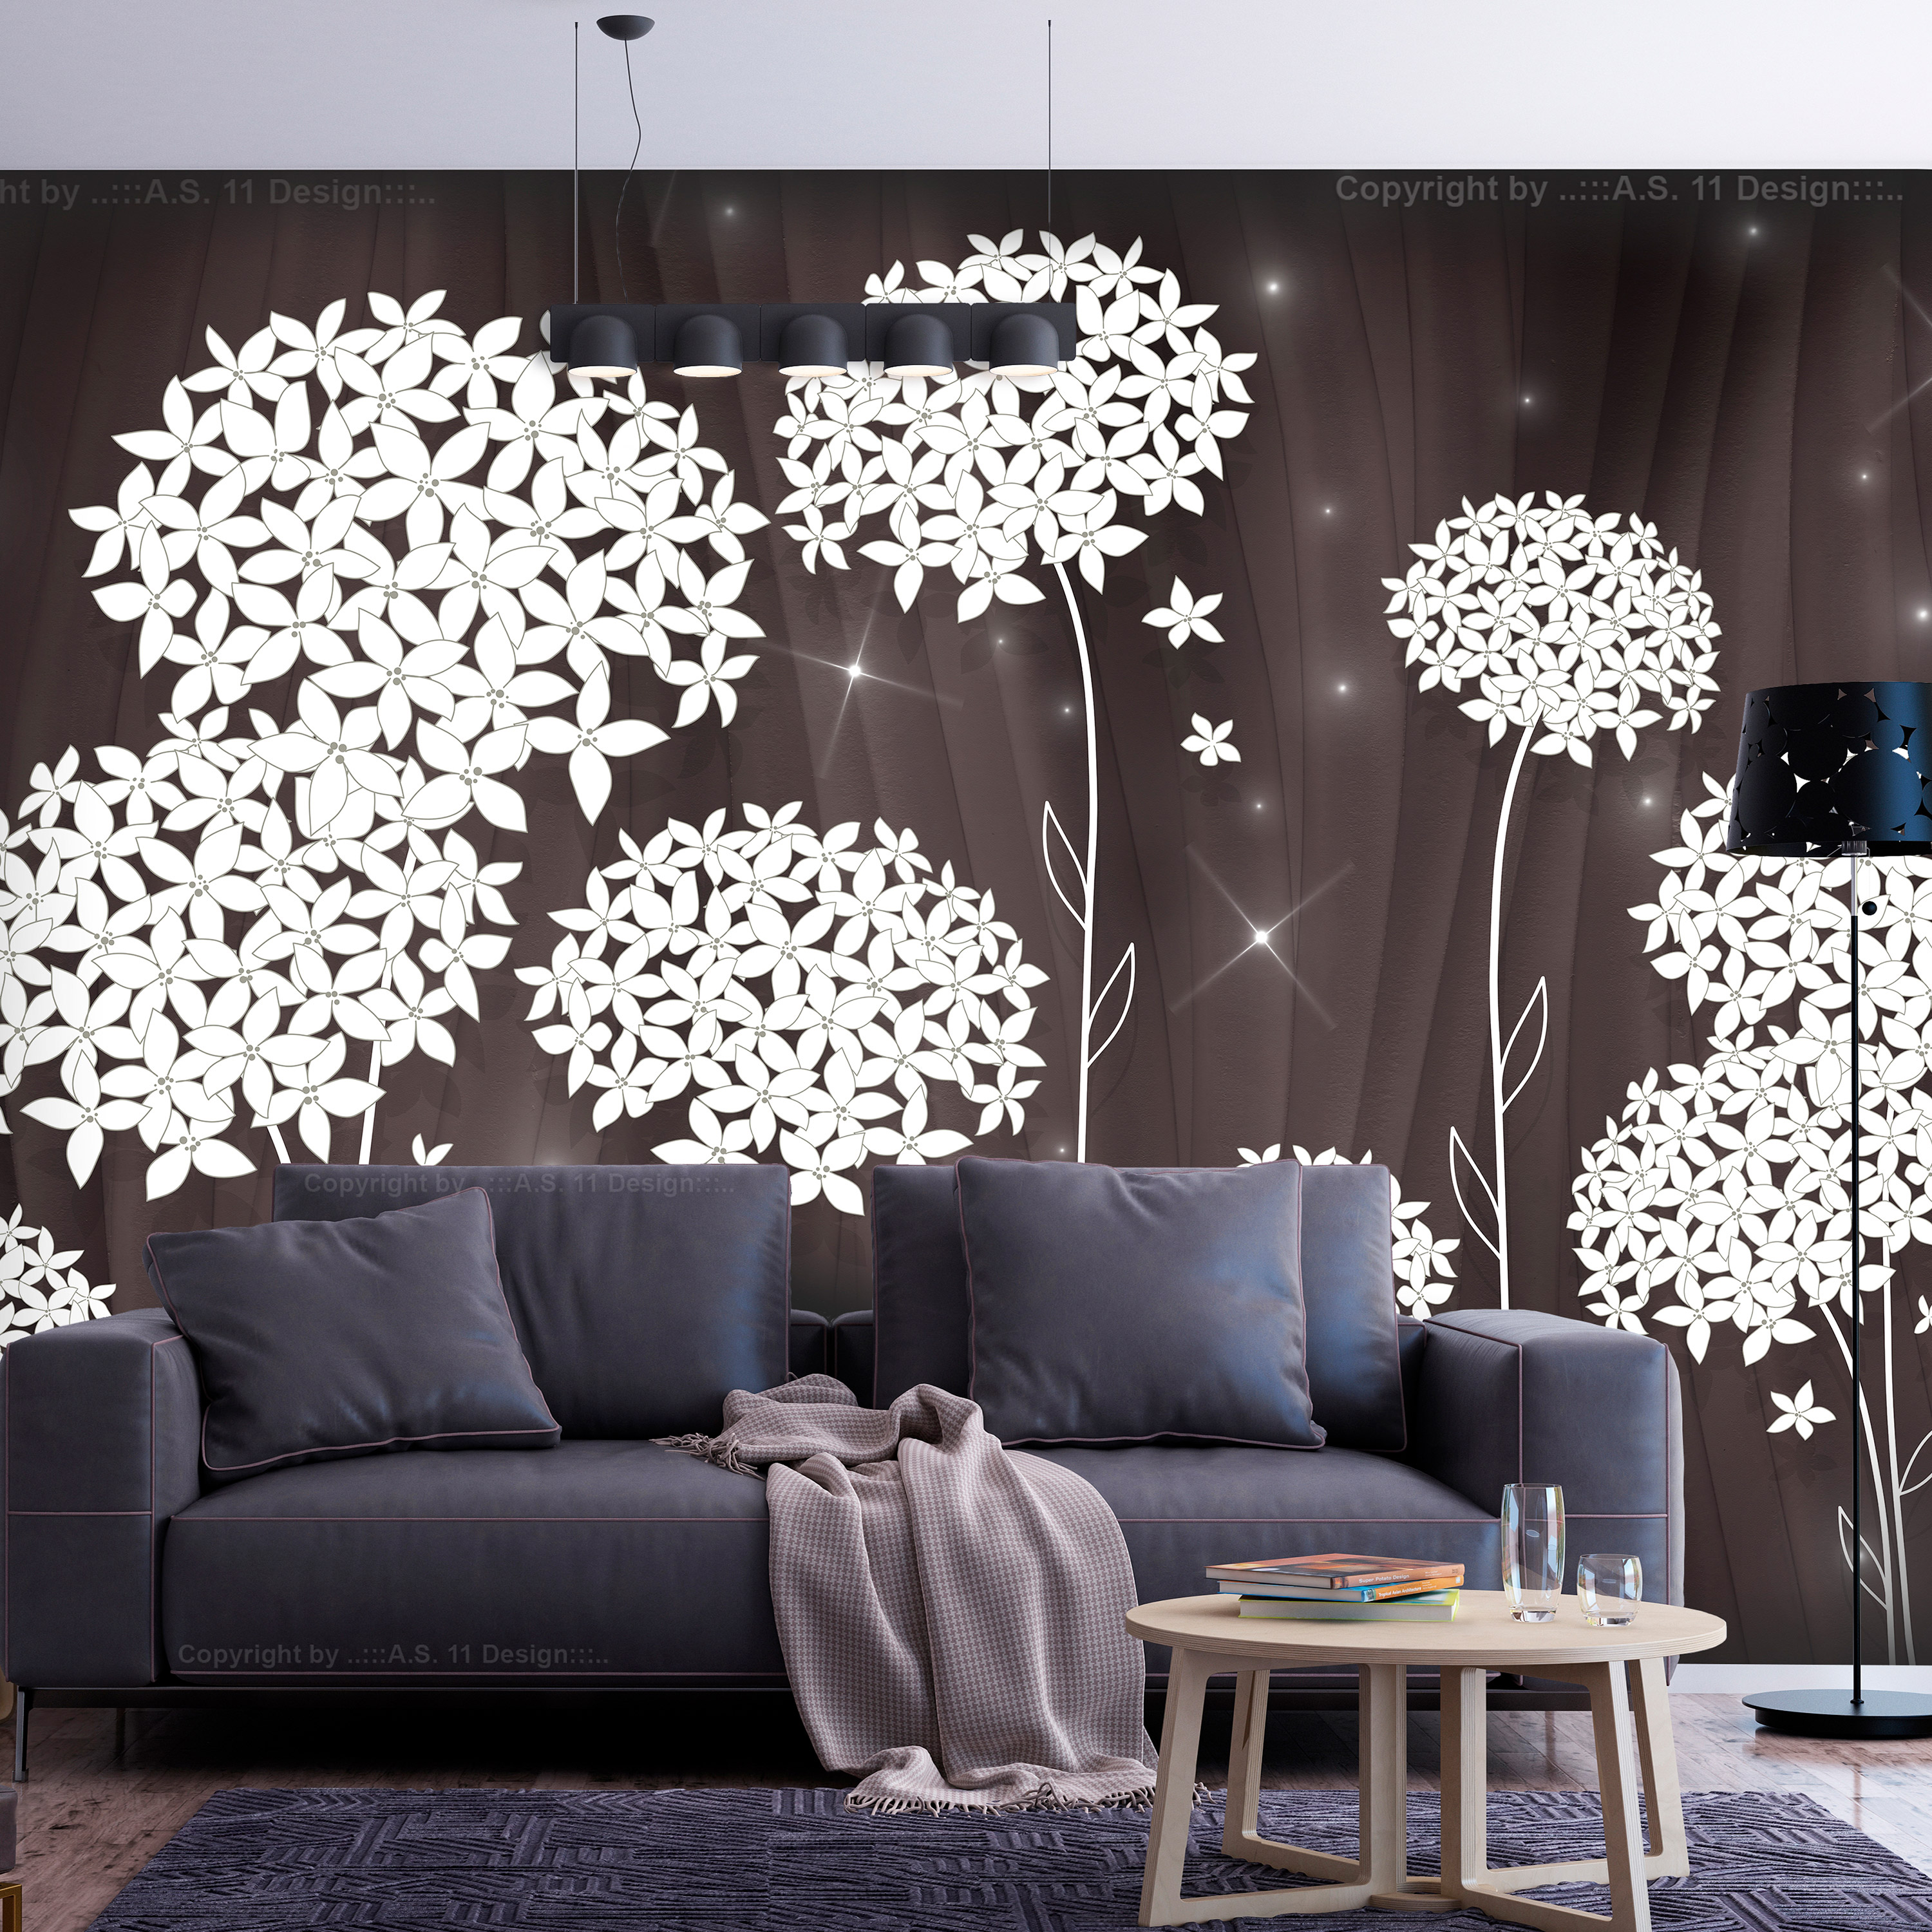 Self-adhesive Wallpaper - Magical Composition - 147x105